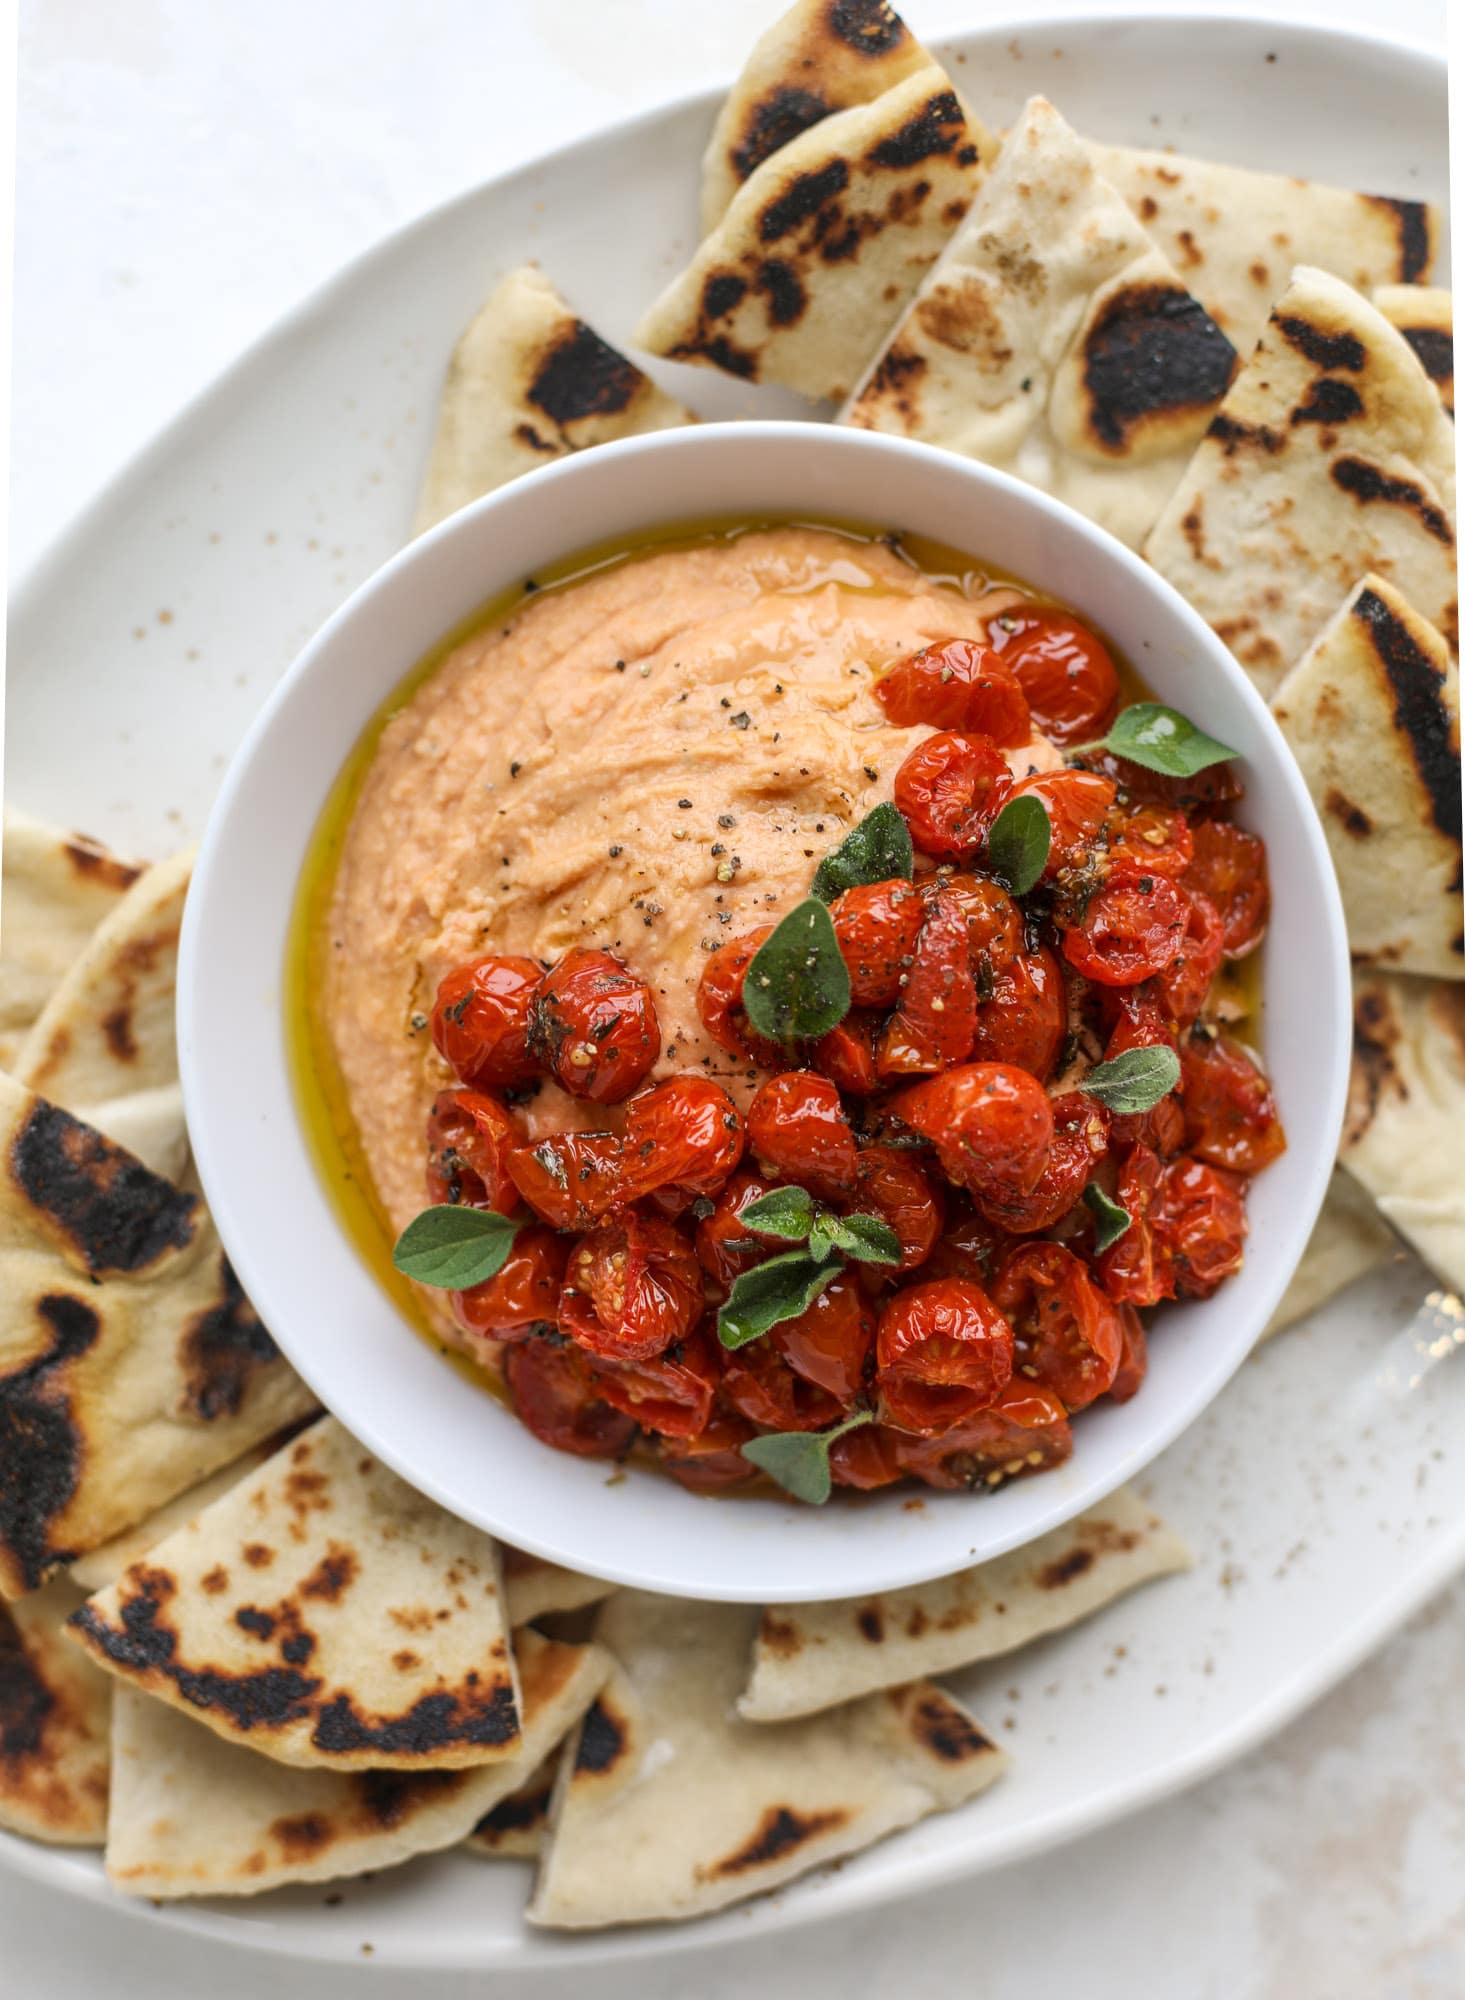 Slow roasted tomato hummus is a creamy and savory spread that is perfect for dipping, sandwiches or wraps, salads and bowls of all kind! I howsweeteats.com #slowroastedtomato #hummus